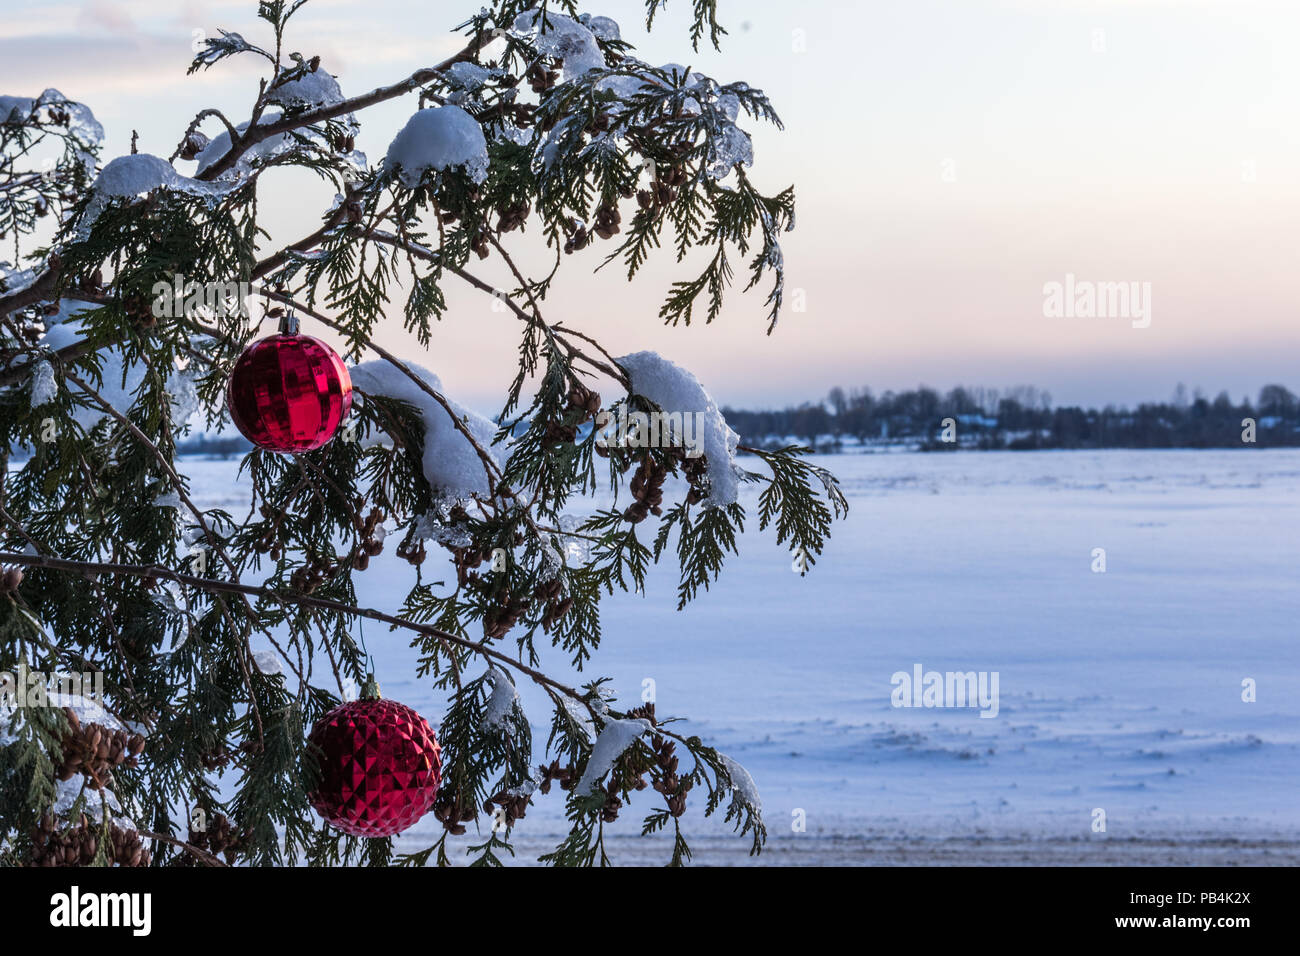 Two red Christmas ornaments hanging on a cedar tree in the snowy landscape in winter Stock Photo